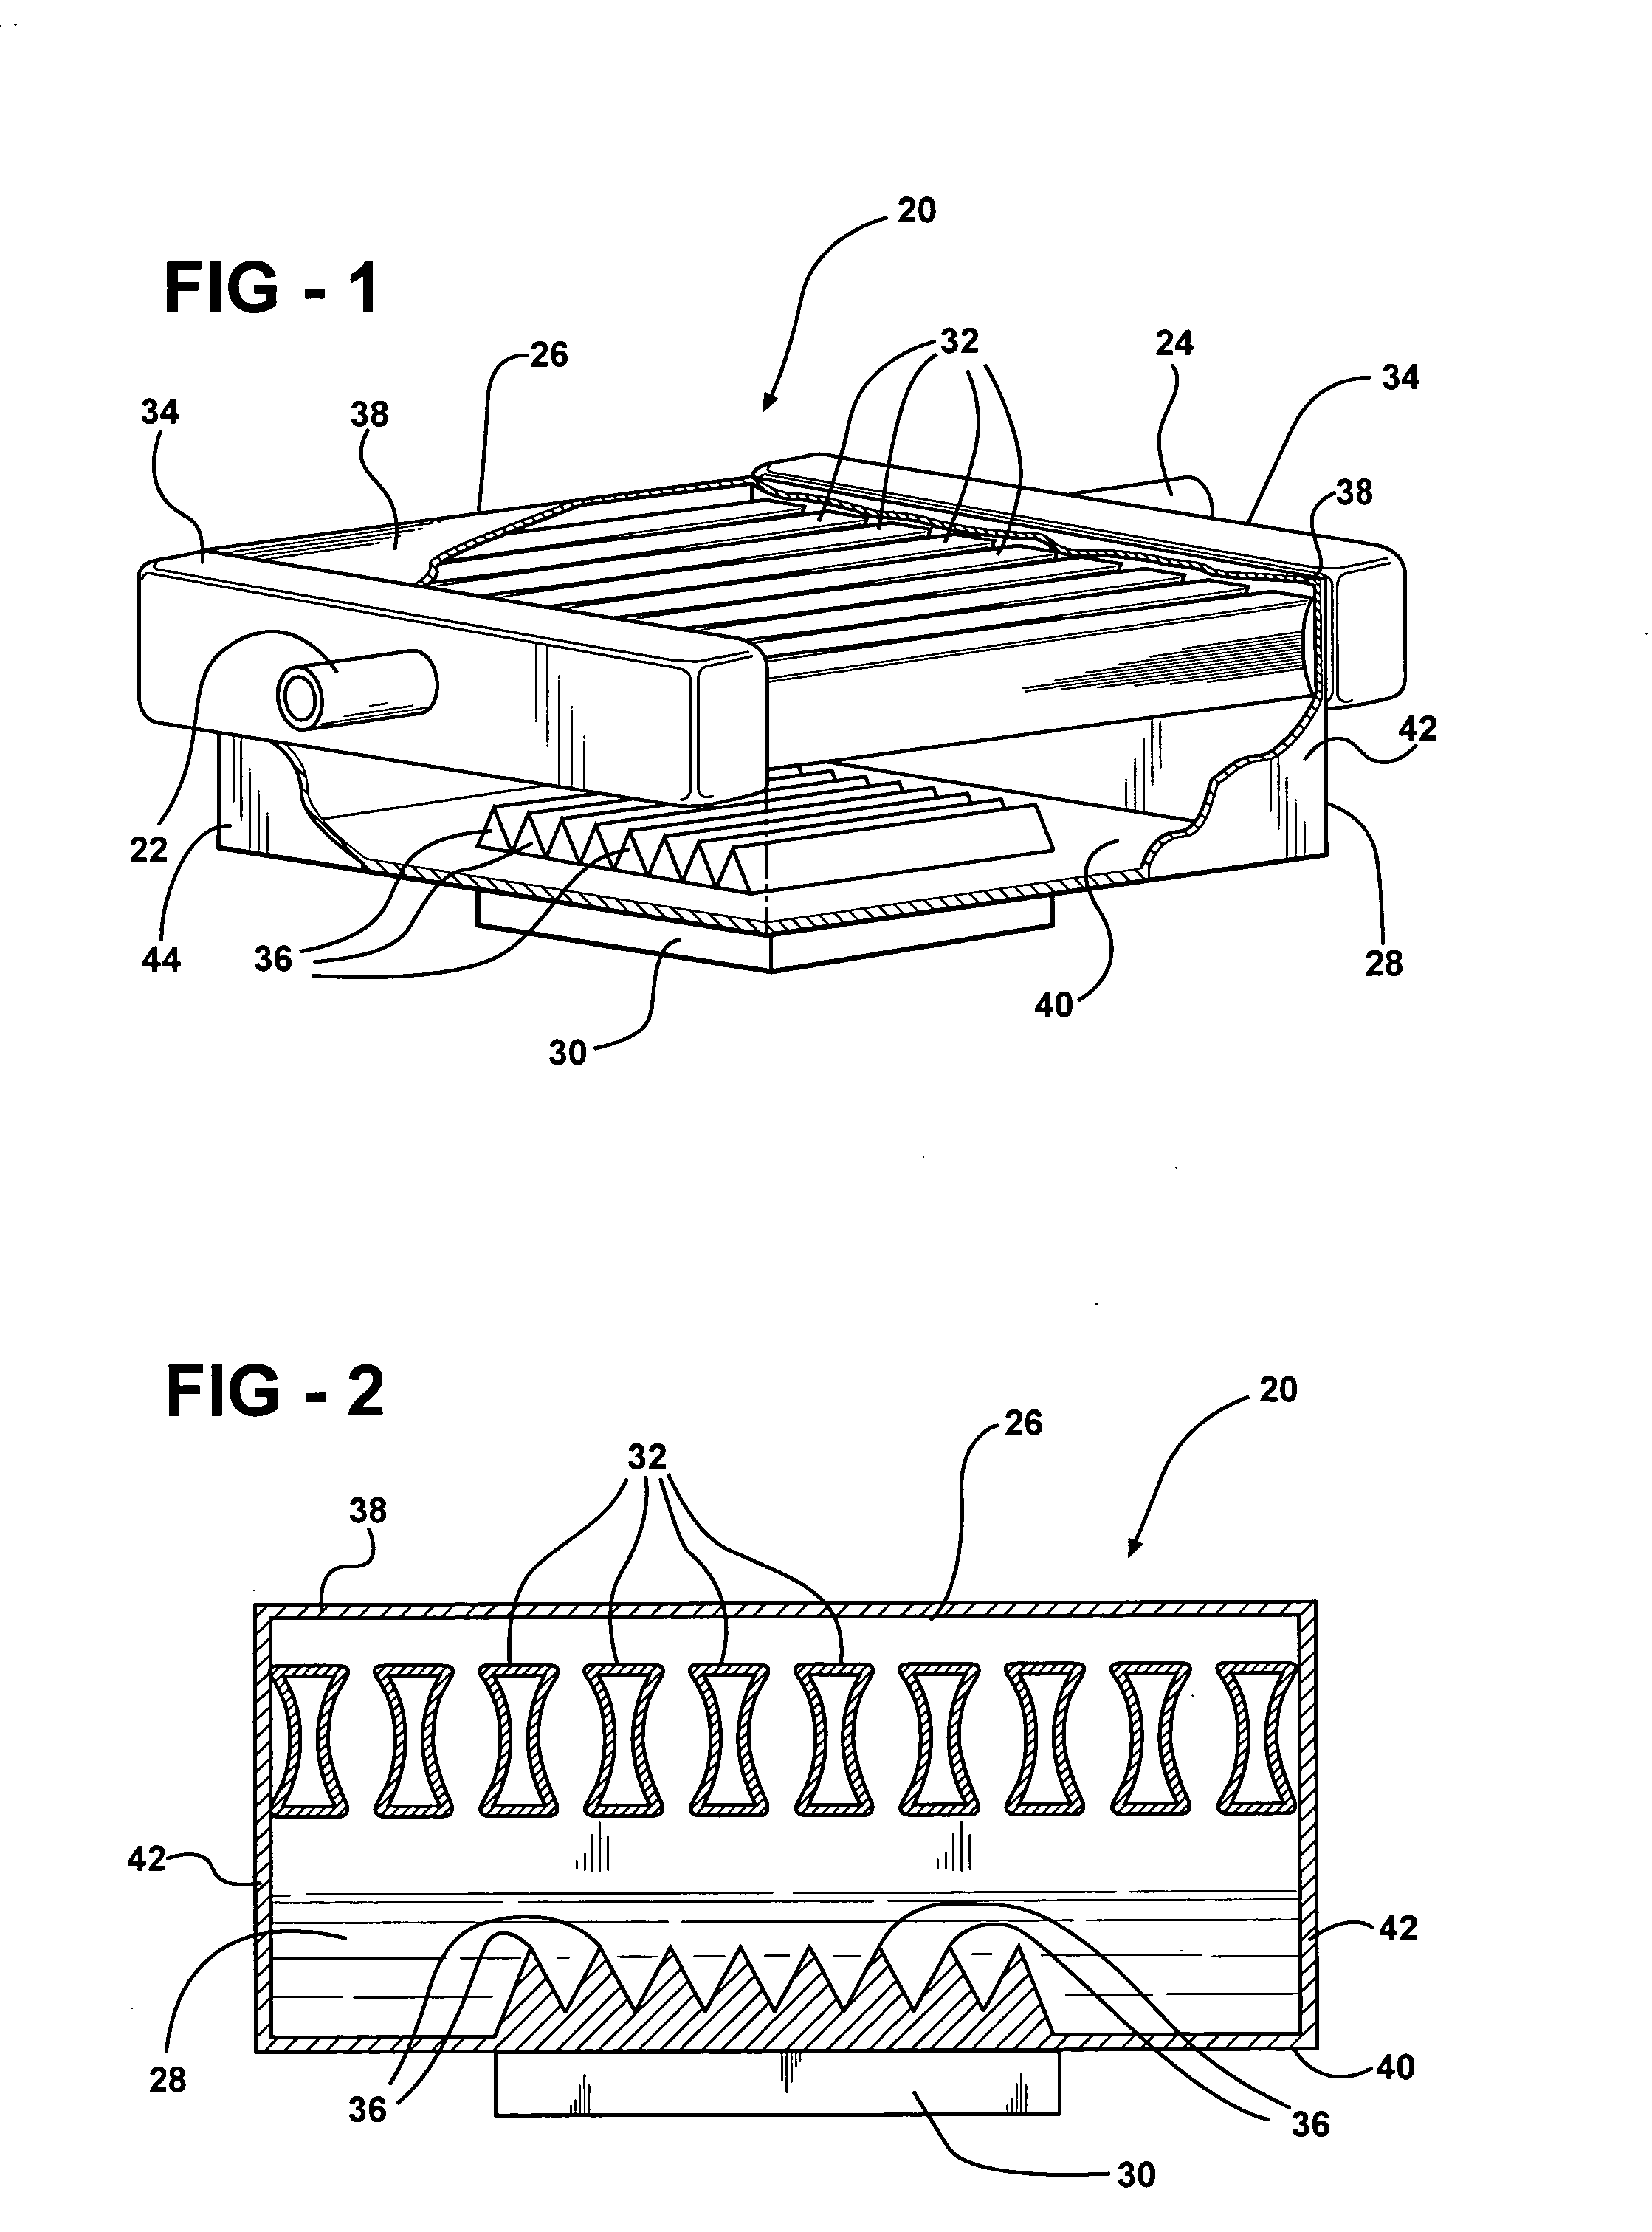 Liquid cooled thermosiphon with flexible coolant tubes